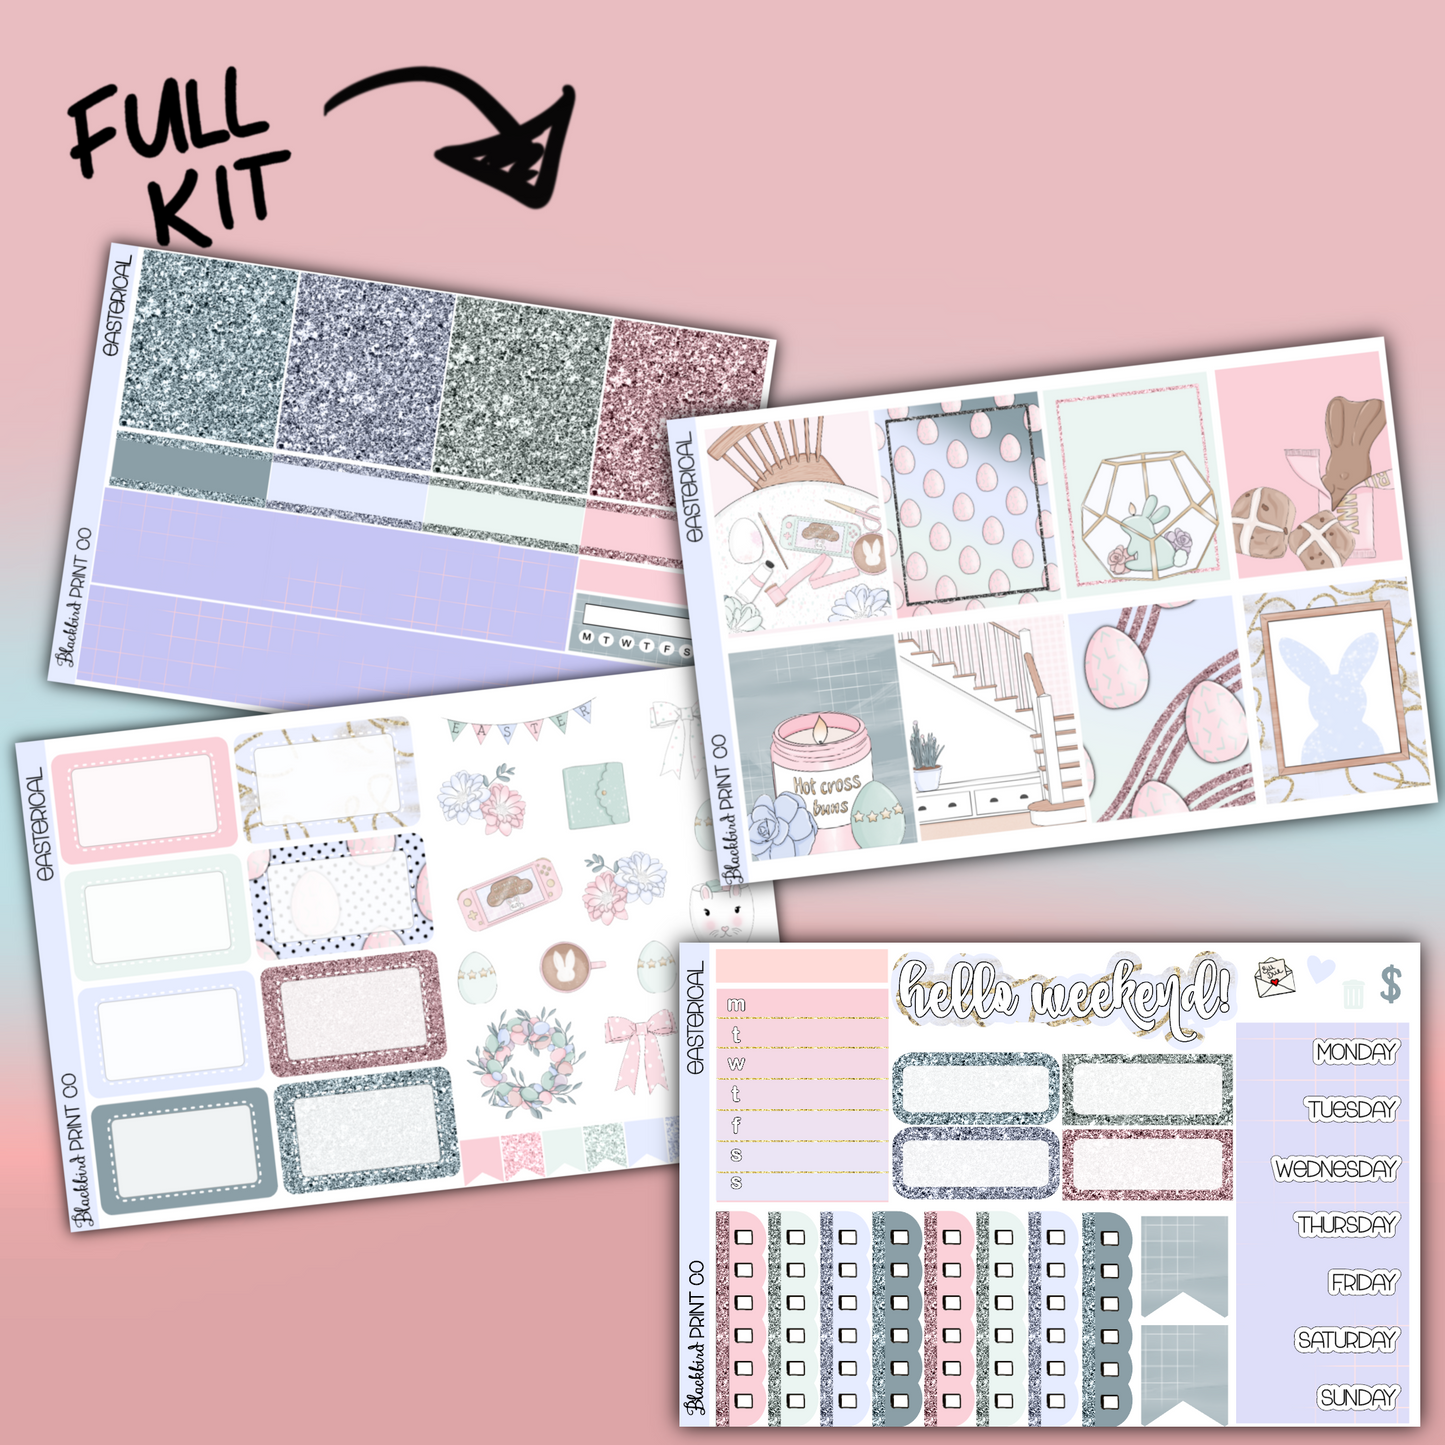 Easterical | Planner Sticker Kit for Vertical Planners